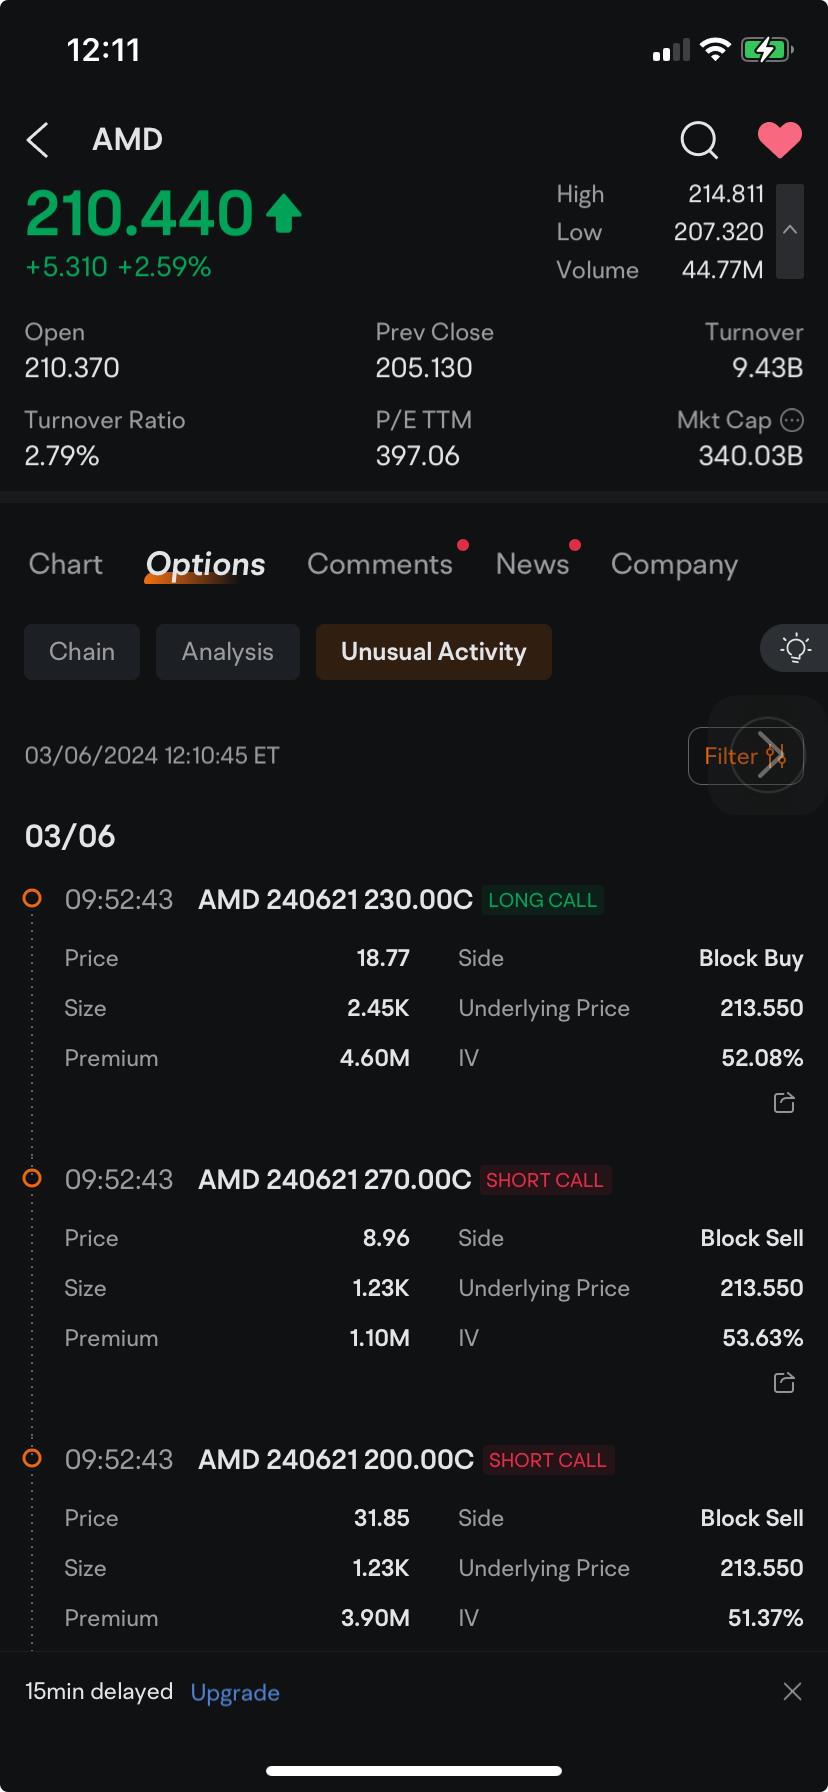 AMD's 43% Rally This Year Spurs Options Block Trades Worth Millions of Dollars